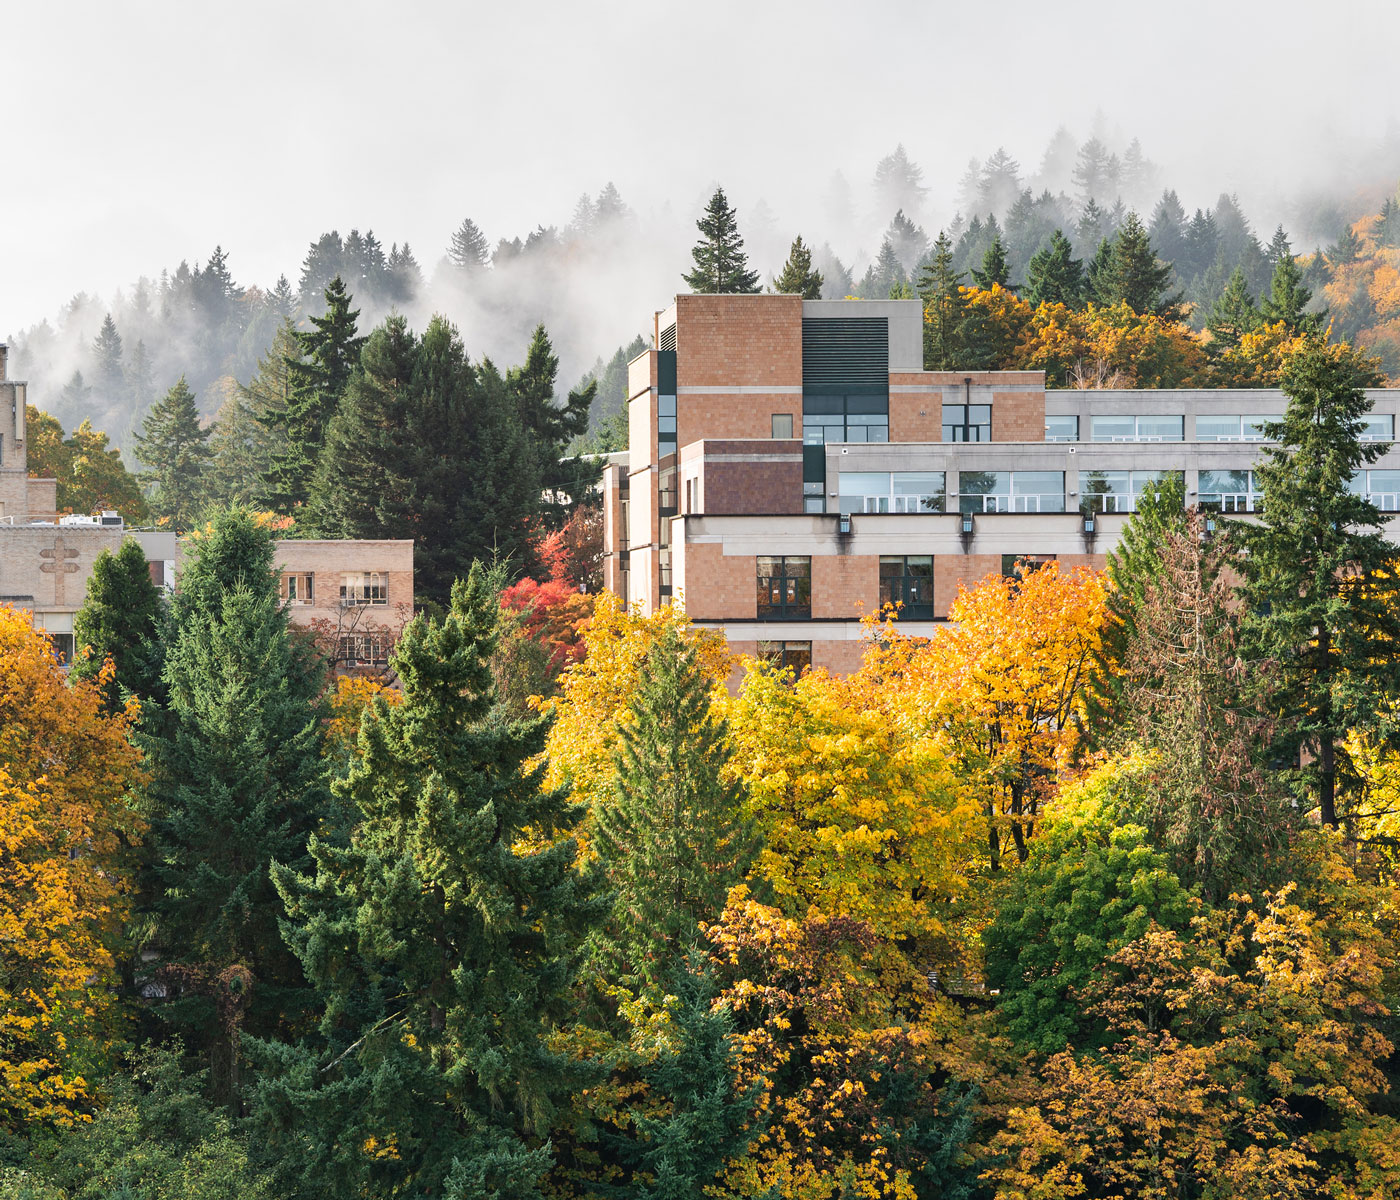 School of Nursing in the autumn leaves and mist